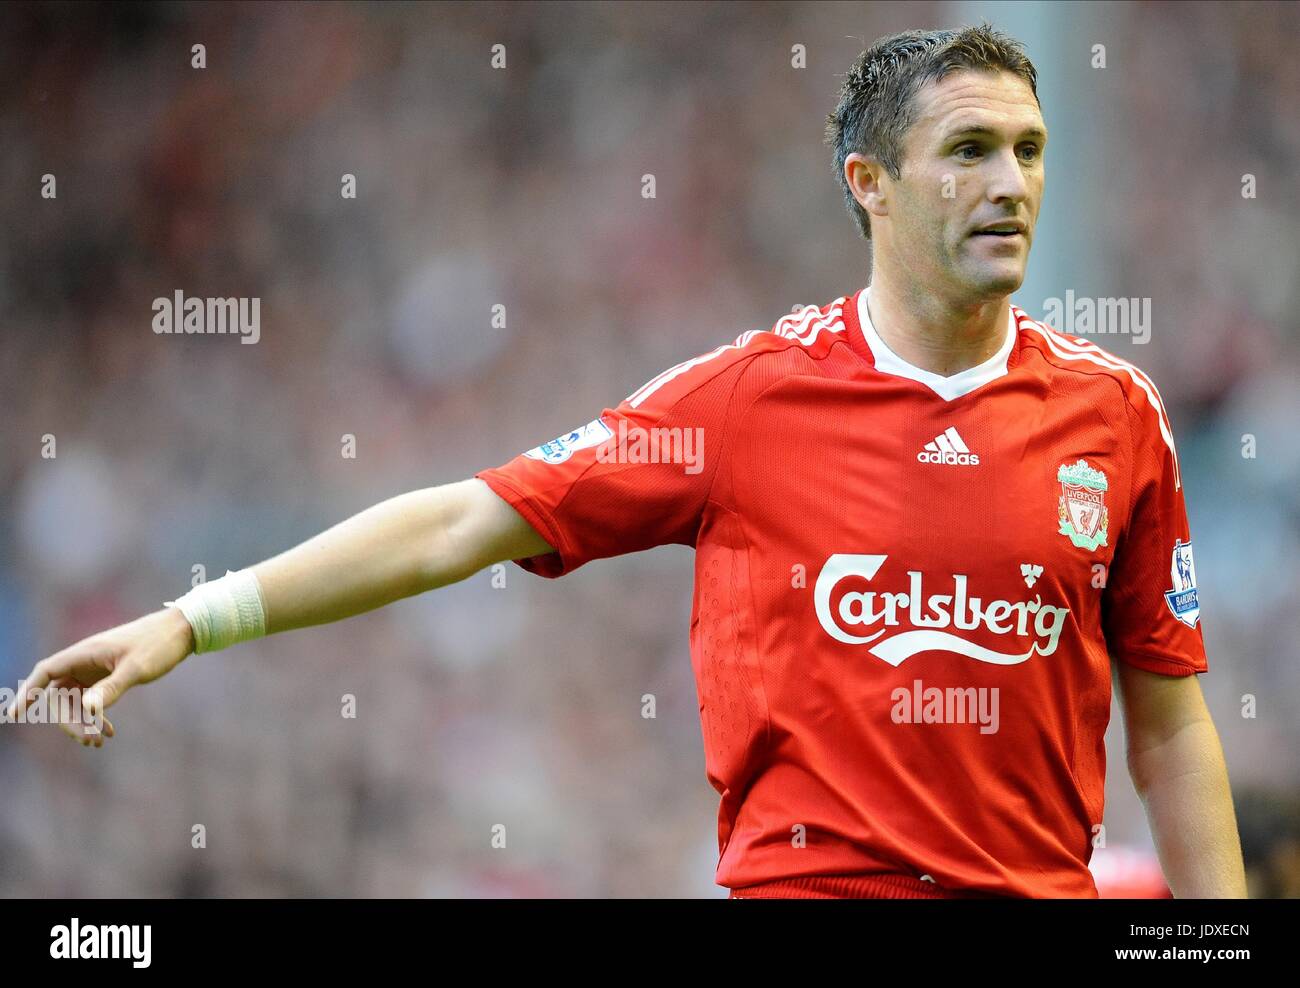 ROBBIE KEANE FC LIVERPOOL ANFIELD LIVERPOOL ANGLETERRE 08 Août 2008 Banque D'Images